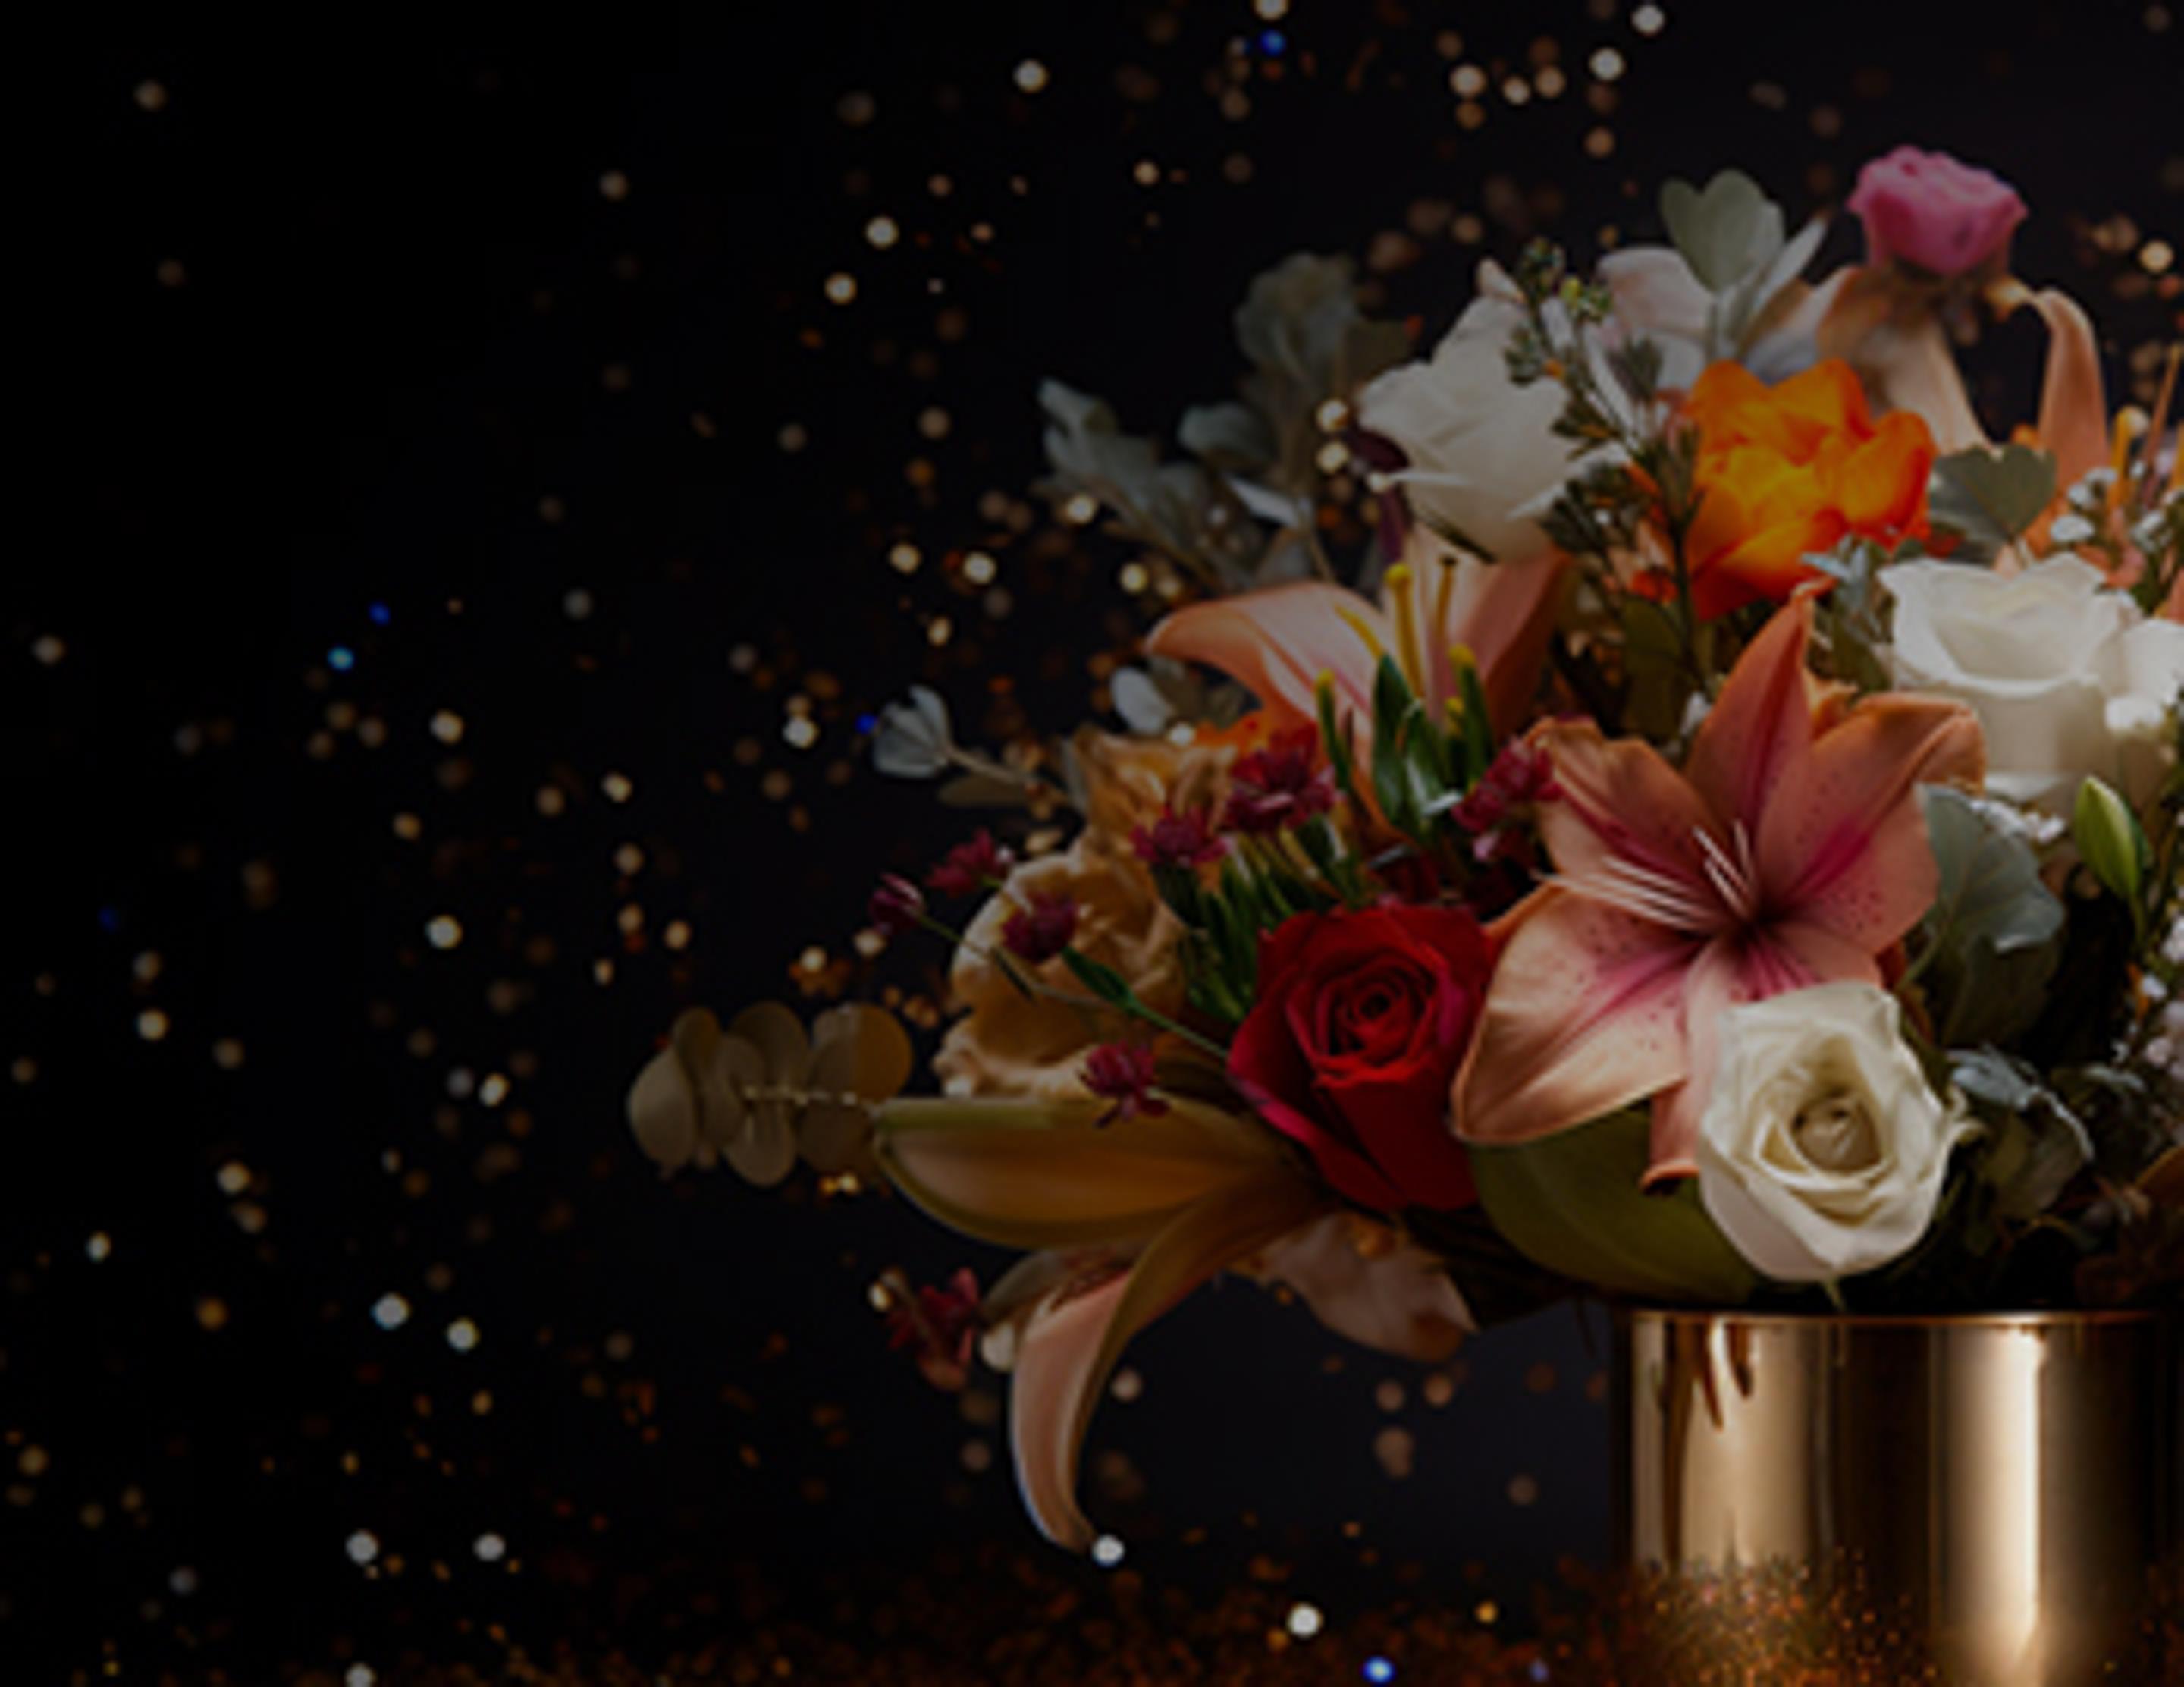 Luxurious floral arrangement in a golden vase featuring a rich mix of lilies, roses, and other assorted flowers, set against a dark backdrop with glittering accents.